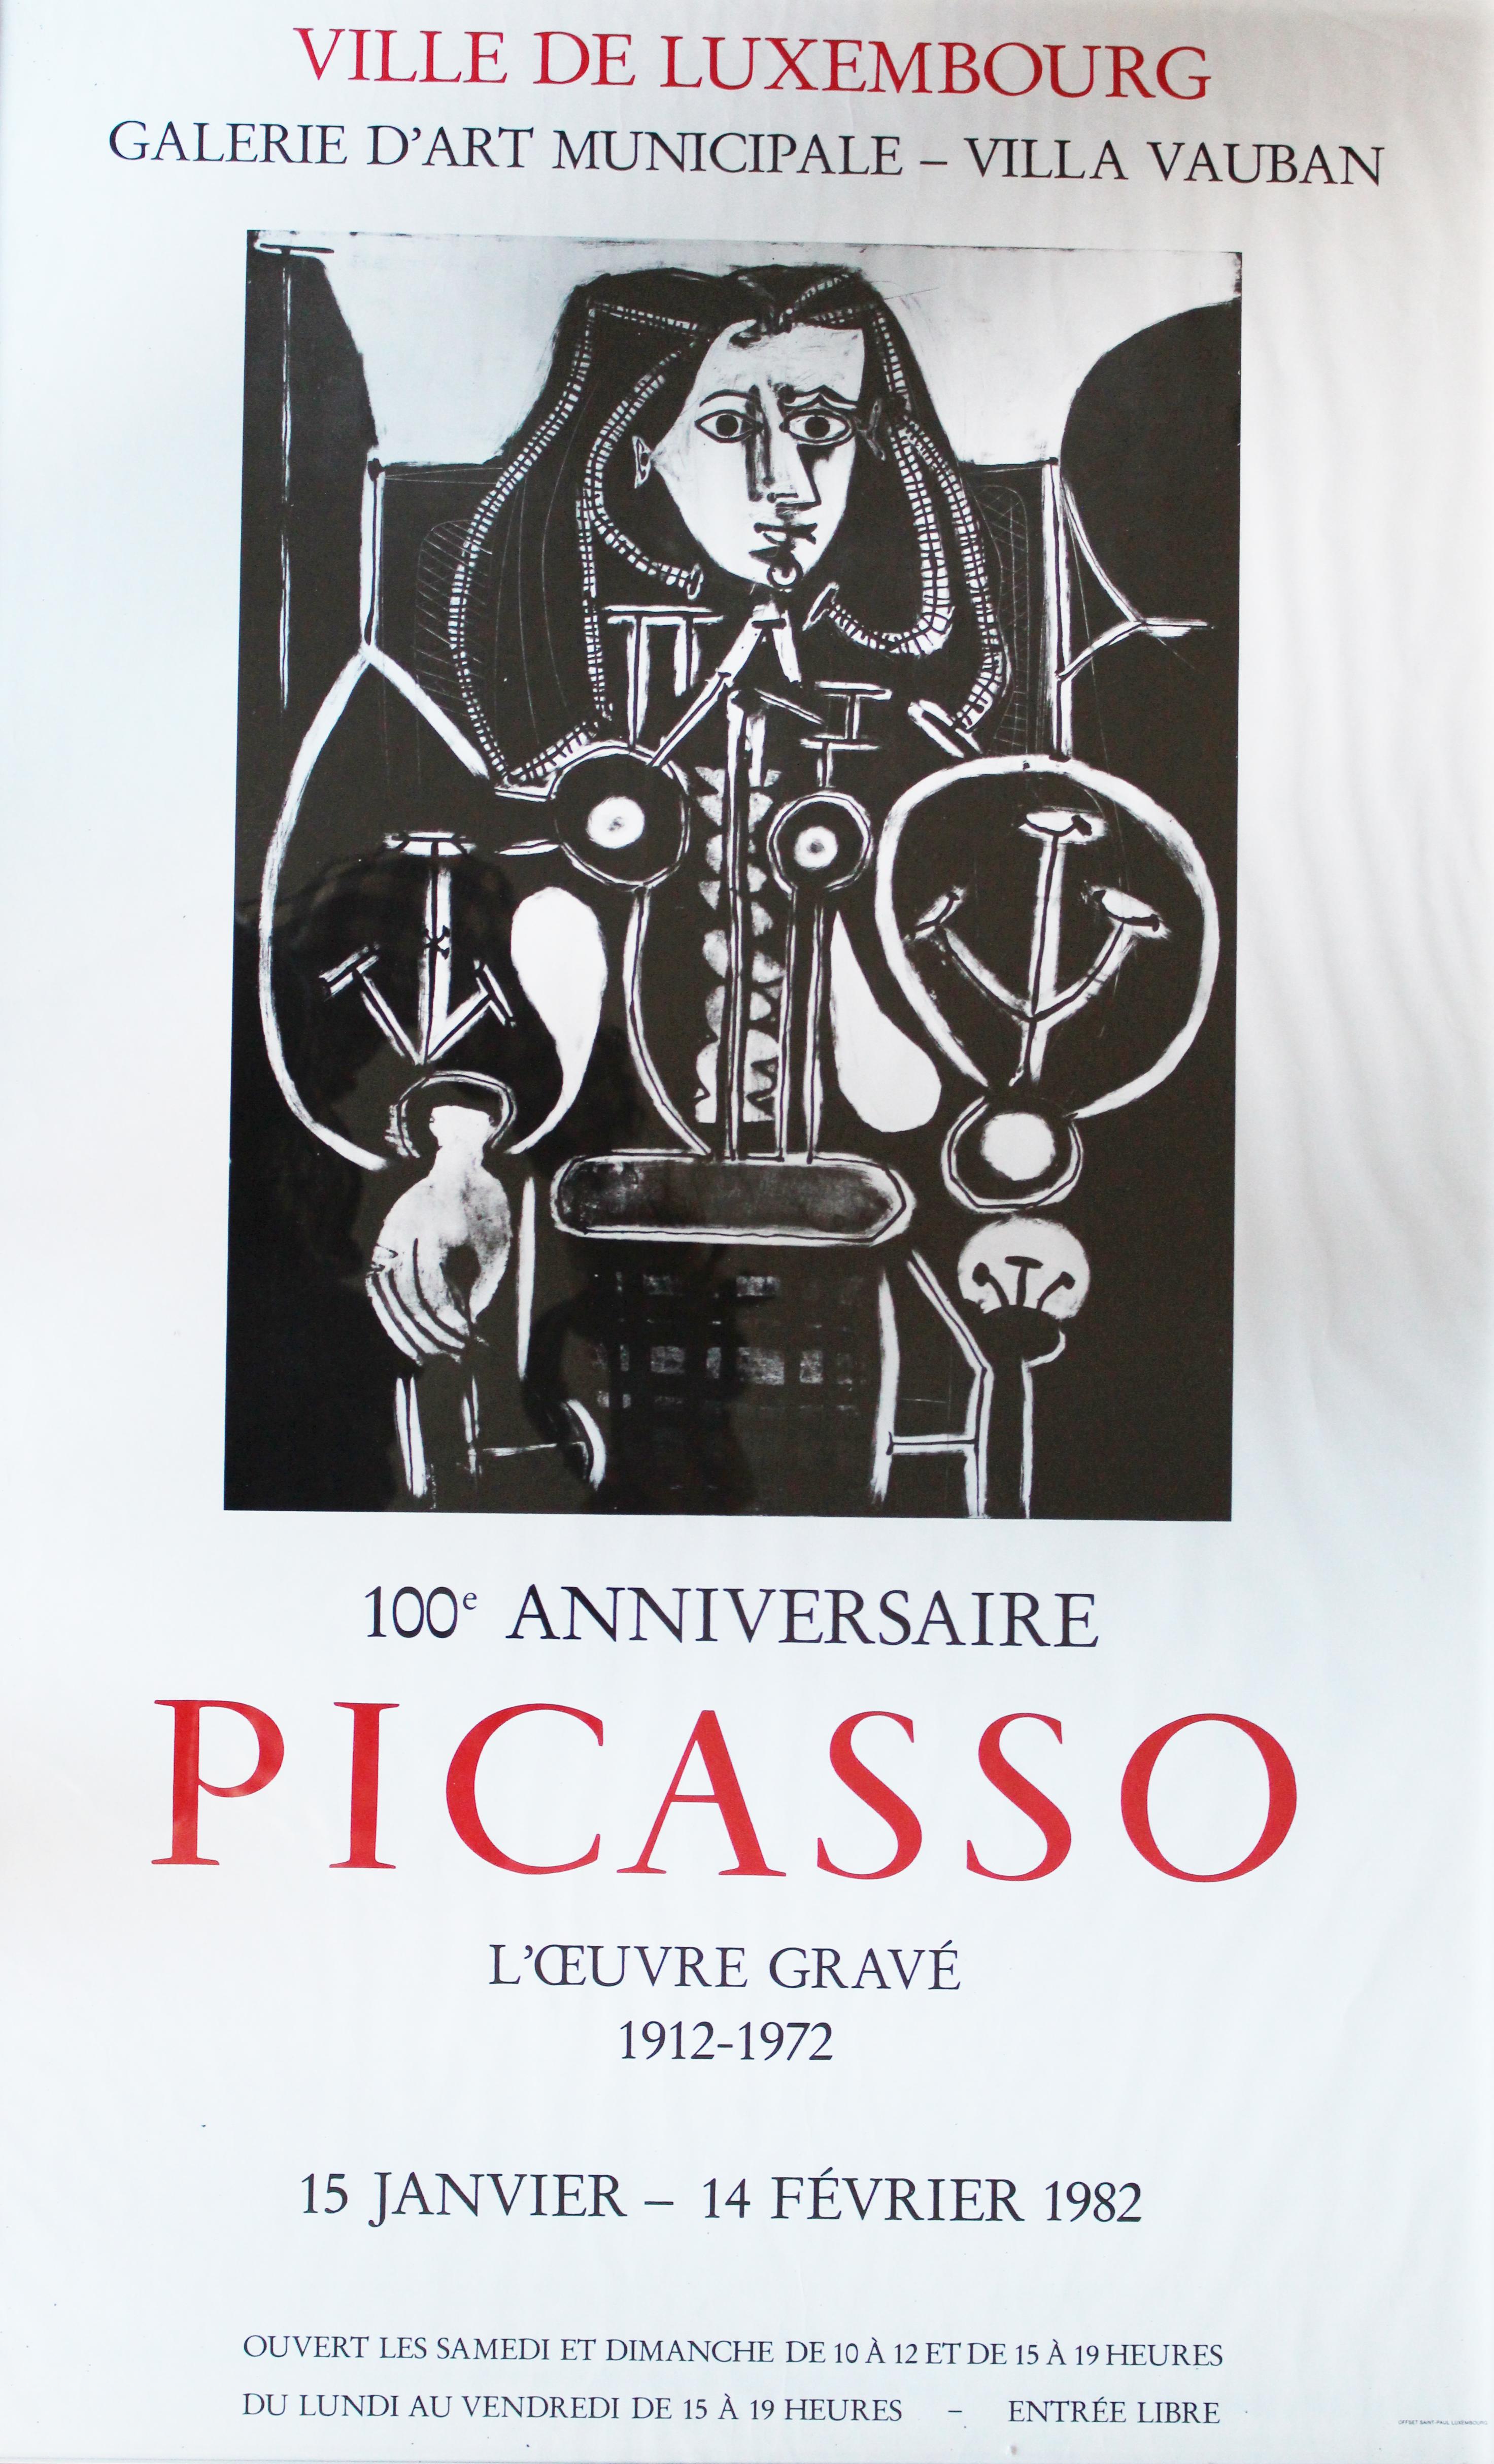 Pablo Picasso - "100 ANNIVERSAIRE, L'Oeuvre Gravé'' (Poster for the Exhibition at Ville De Luxembourg), Lithograph, Circa 1982. Framed Size 96cm x 63cm Approximately. Please note this is not a modern print or reproduction, therefore will bare some